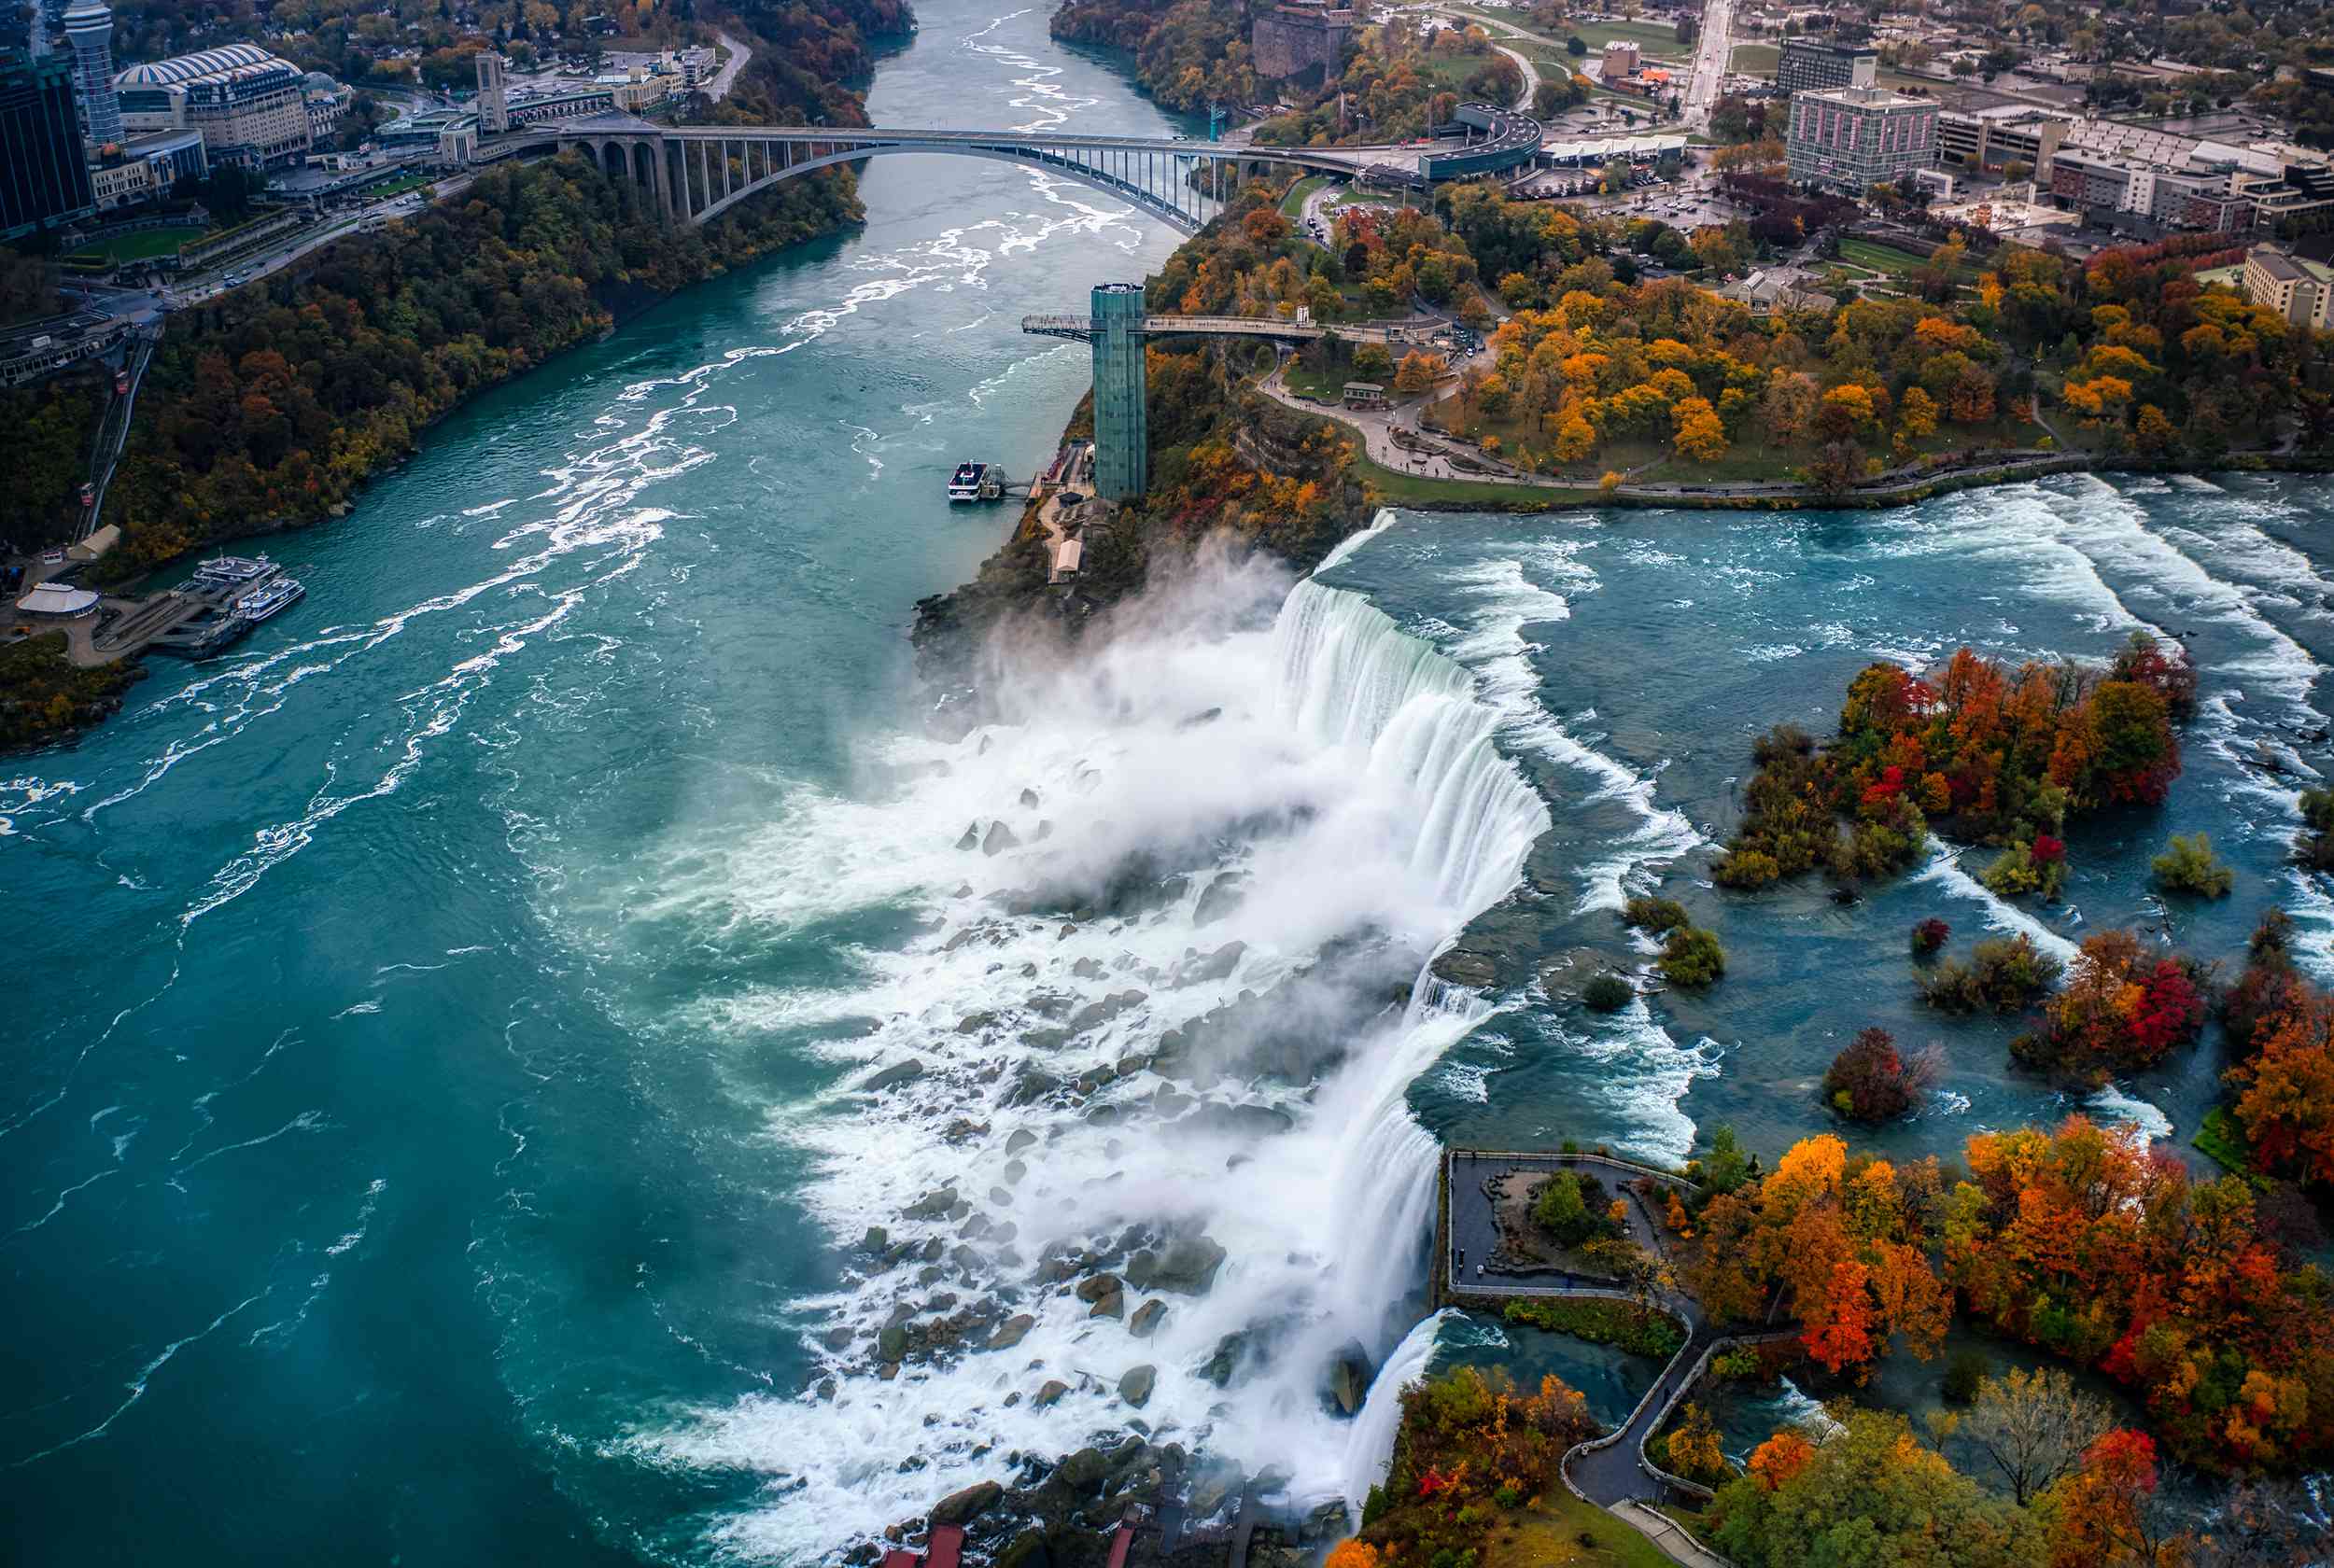 Is Niagara Falls Tap Water Safe to Drink? Tap water & safety quality